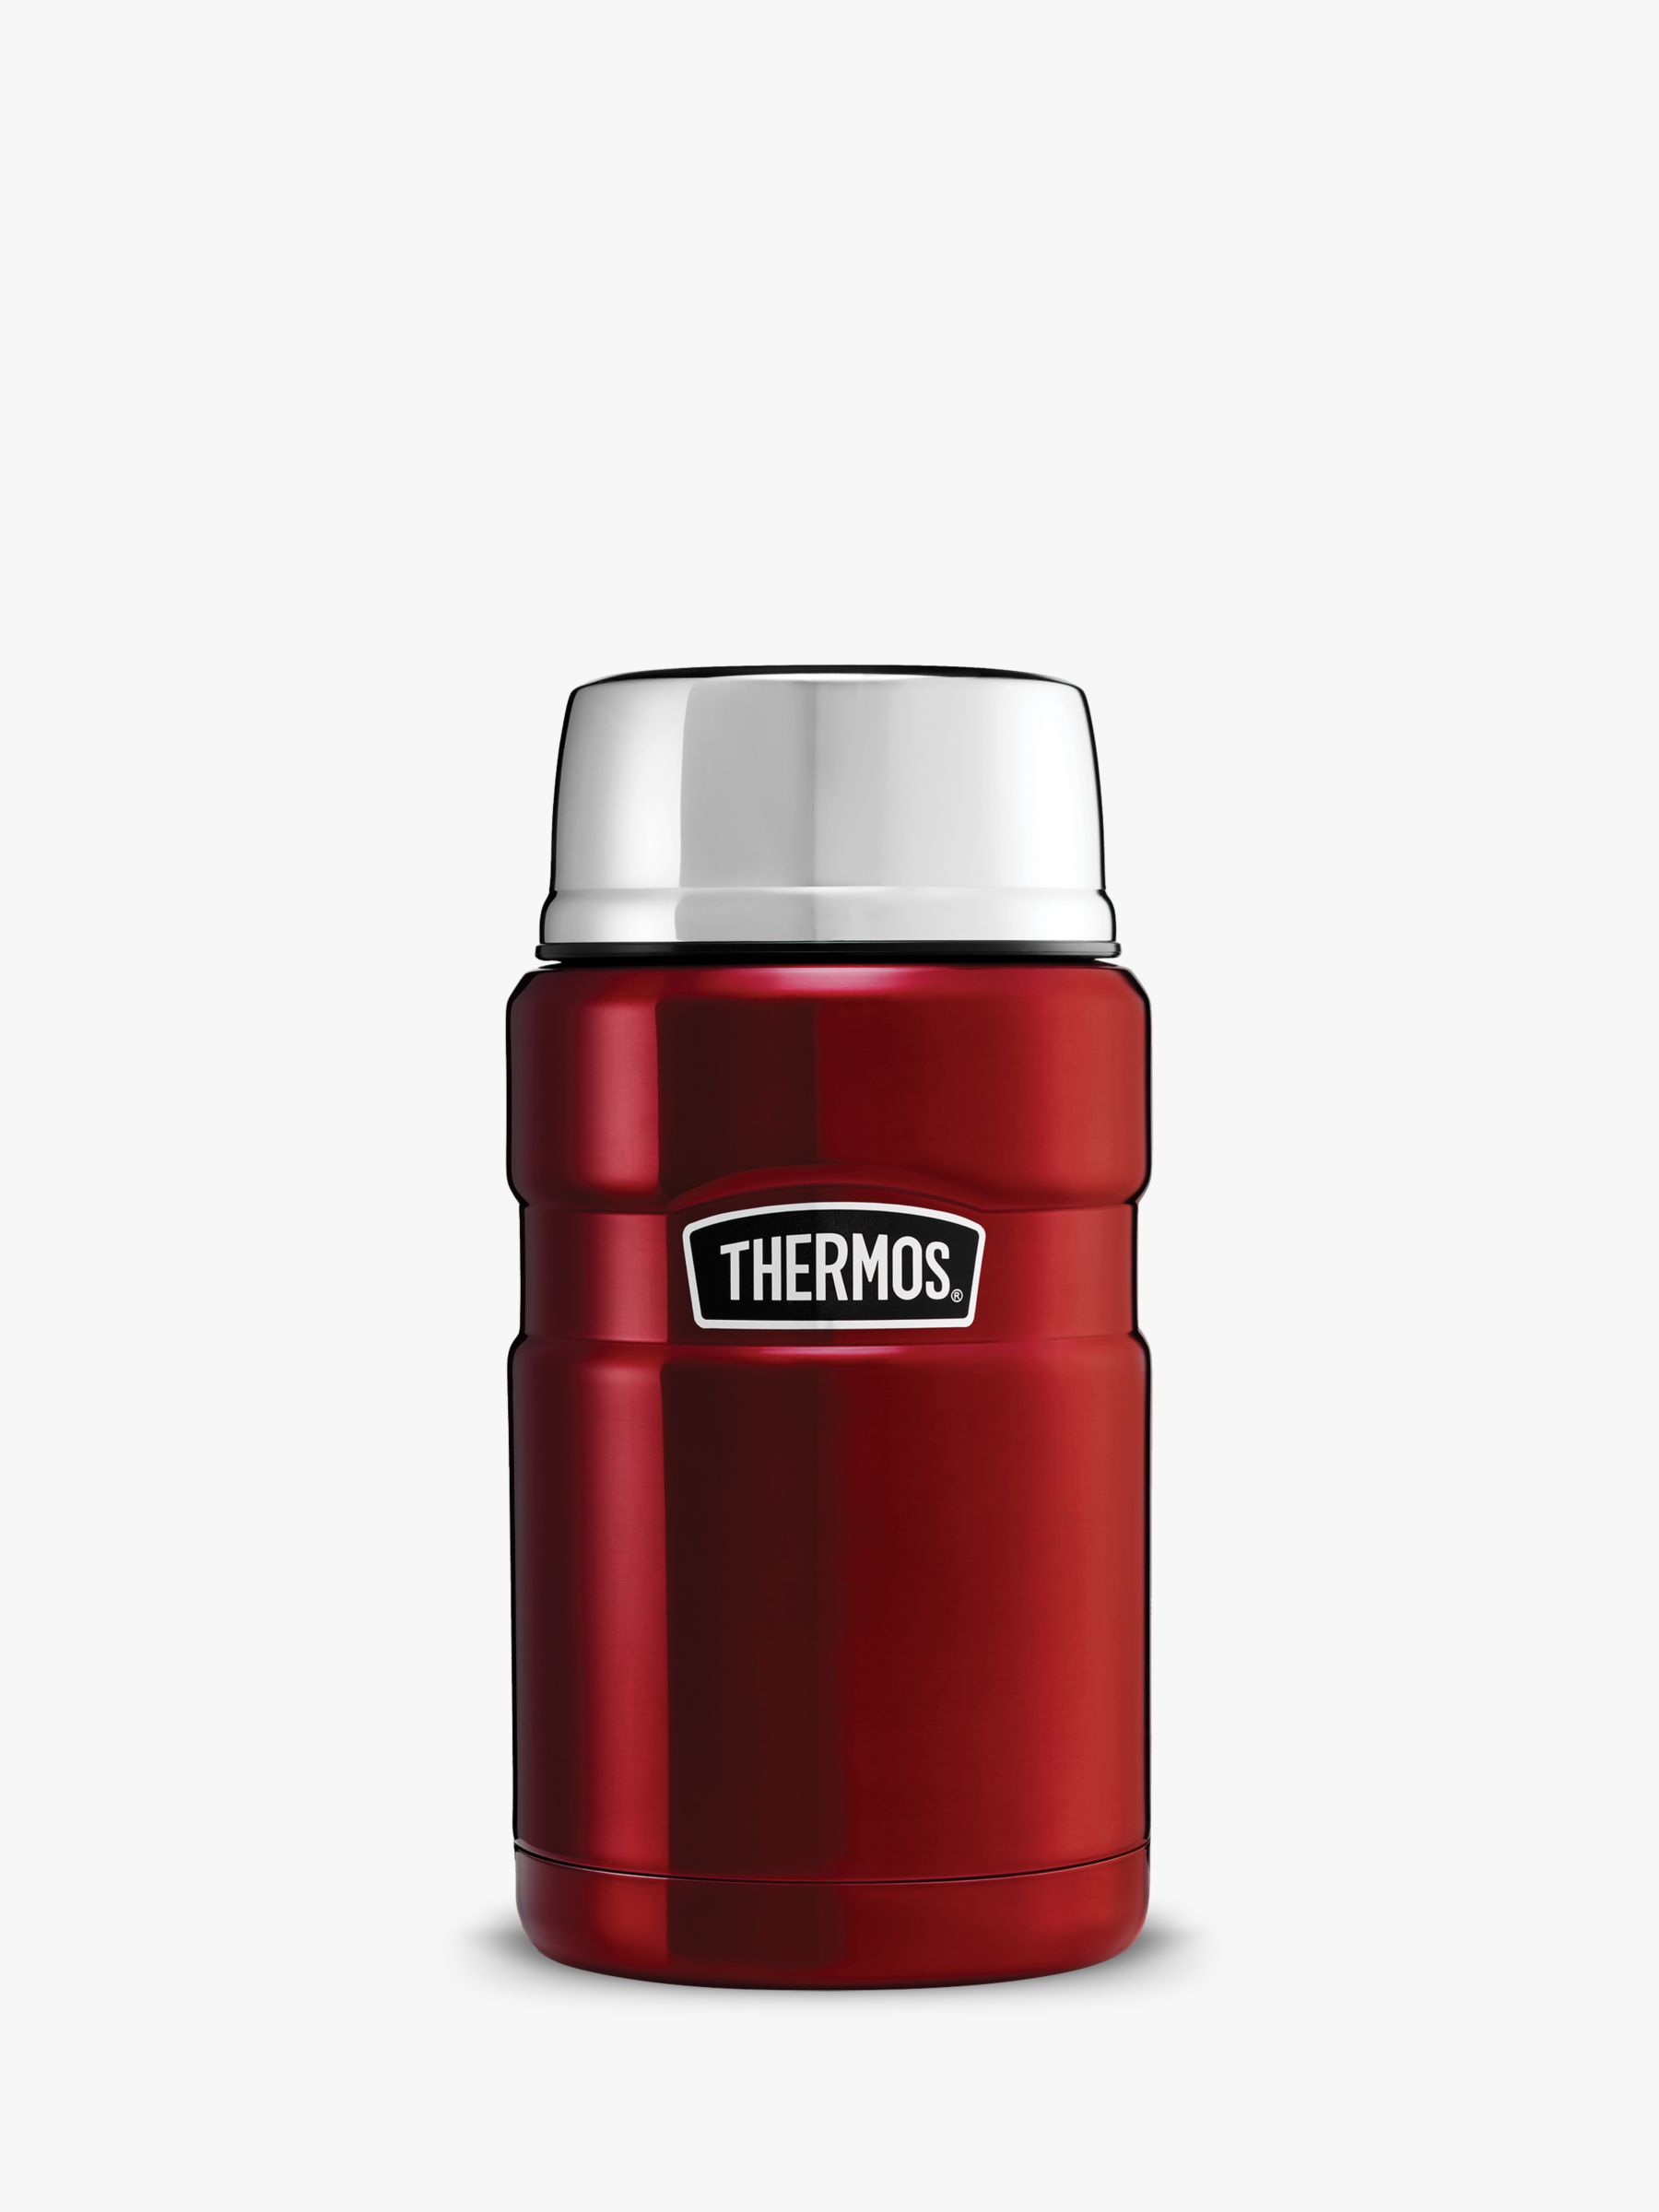 where can i buy a thermos